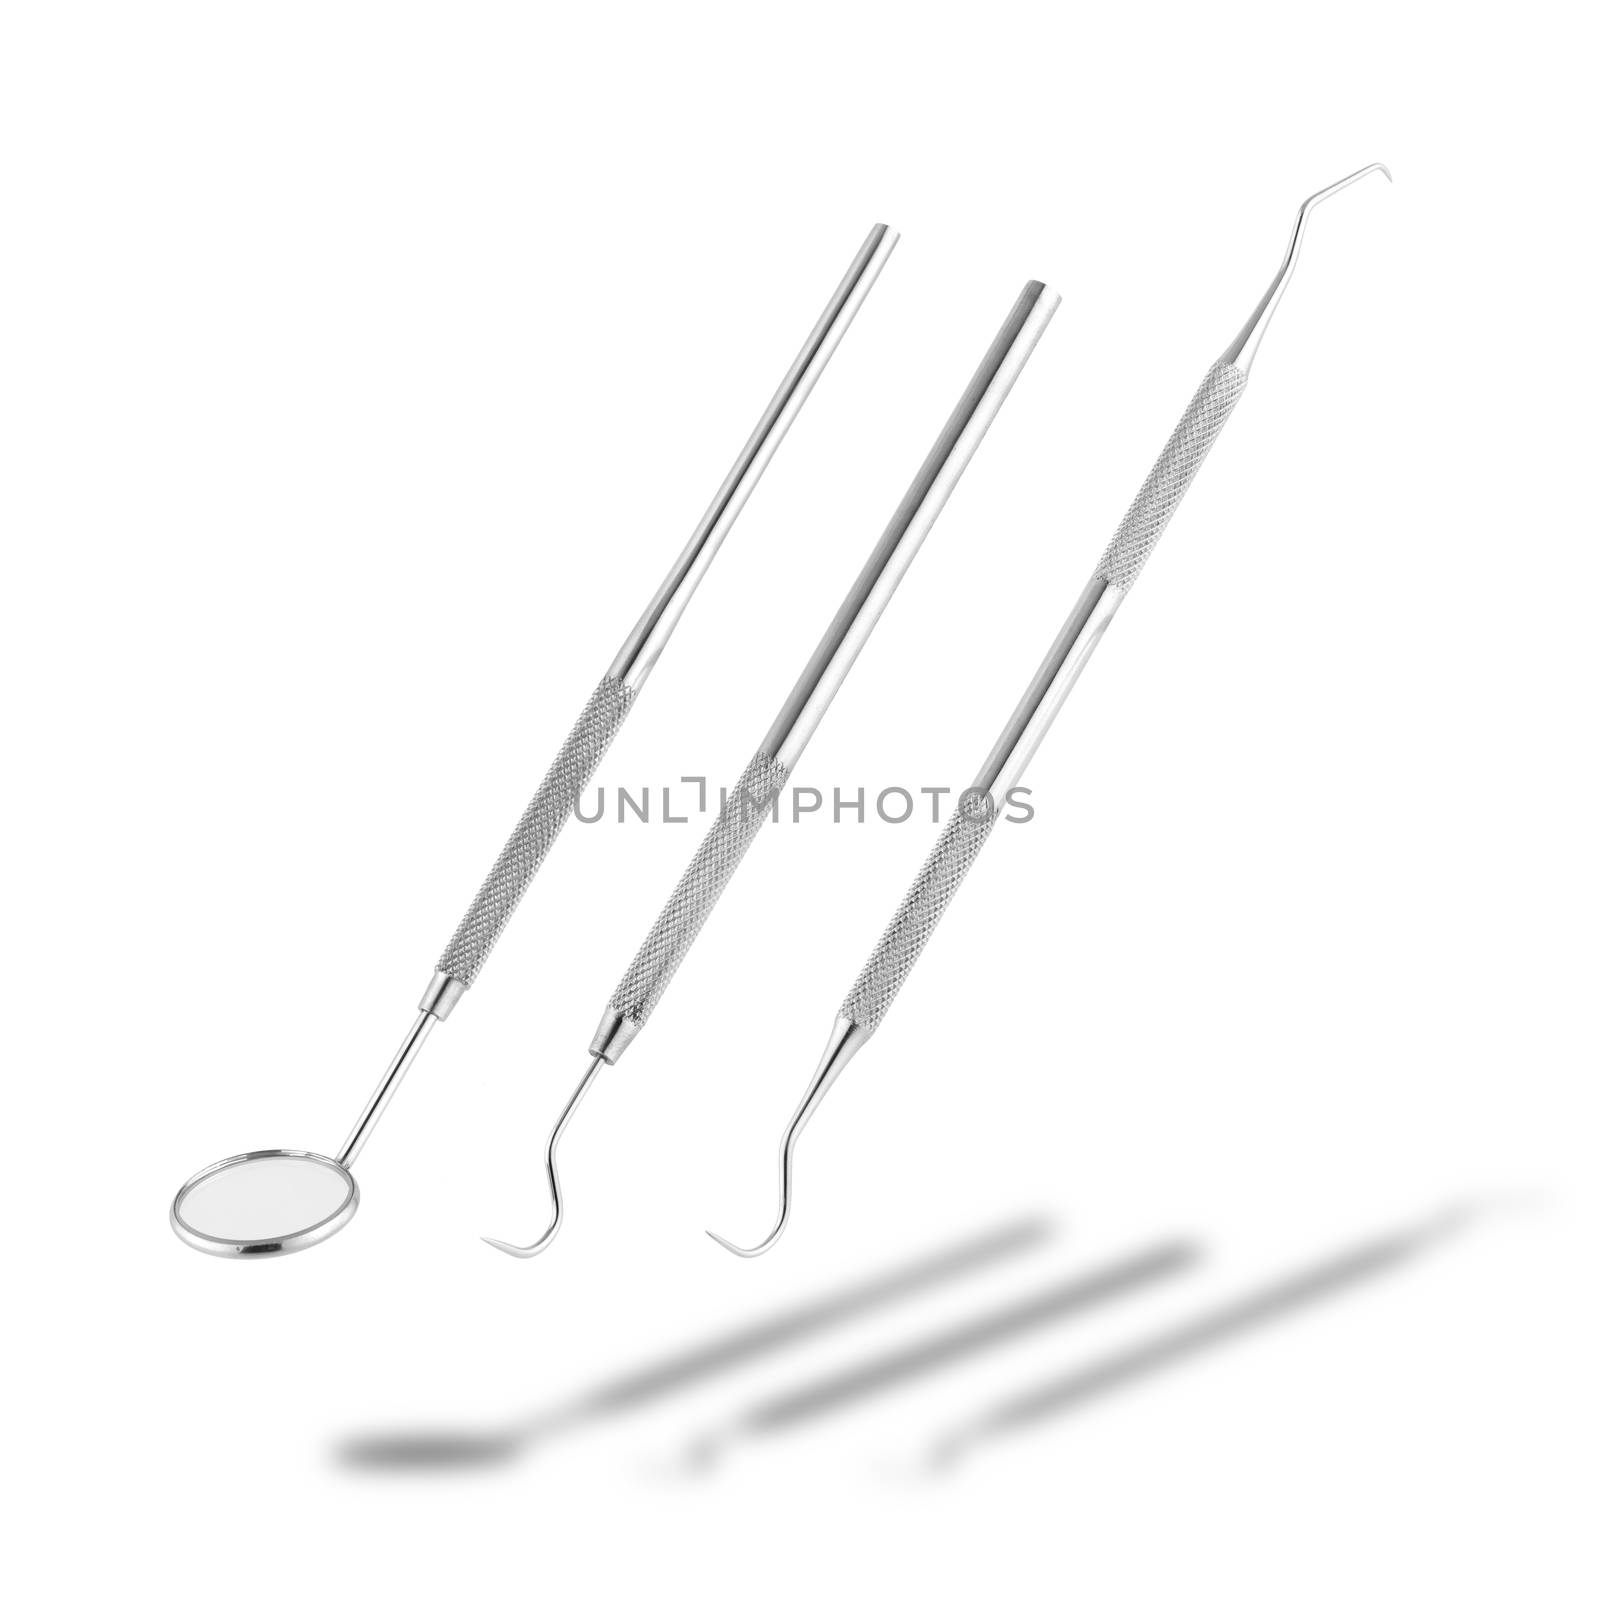 Dental tools on white background with clipping path by VivacityImages